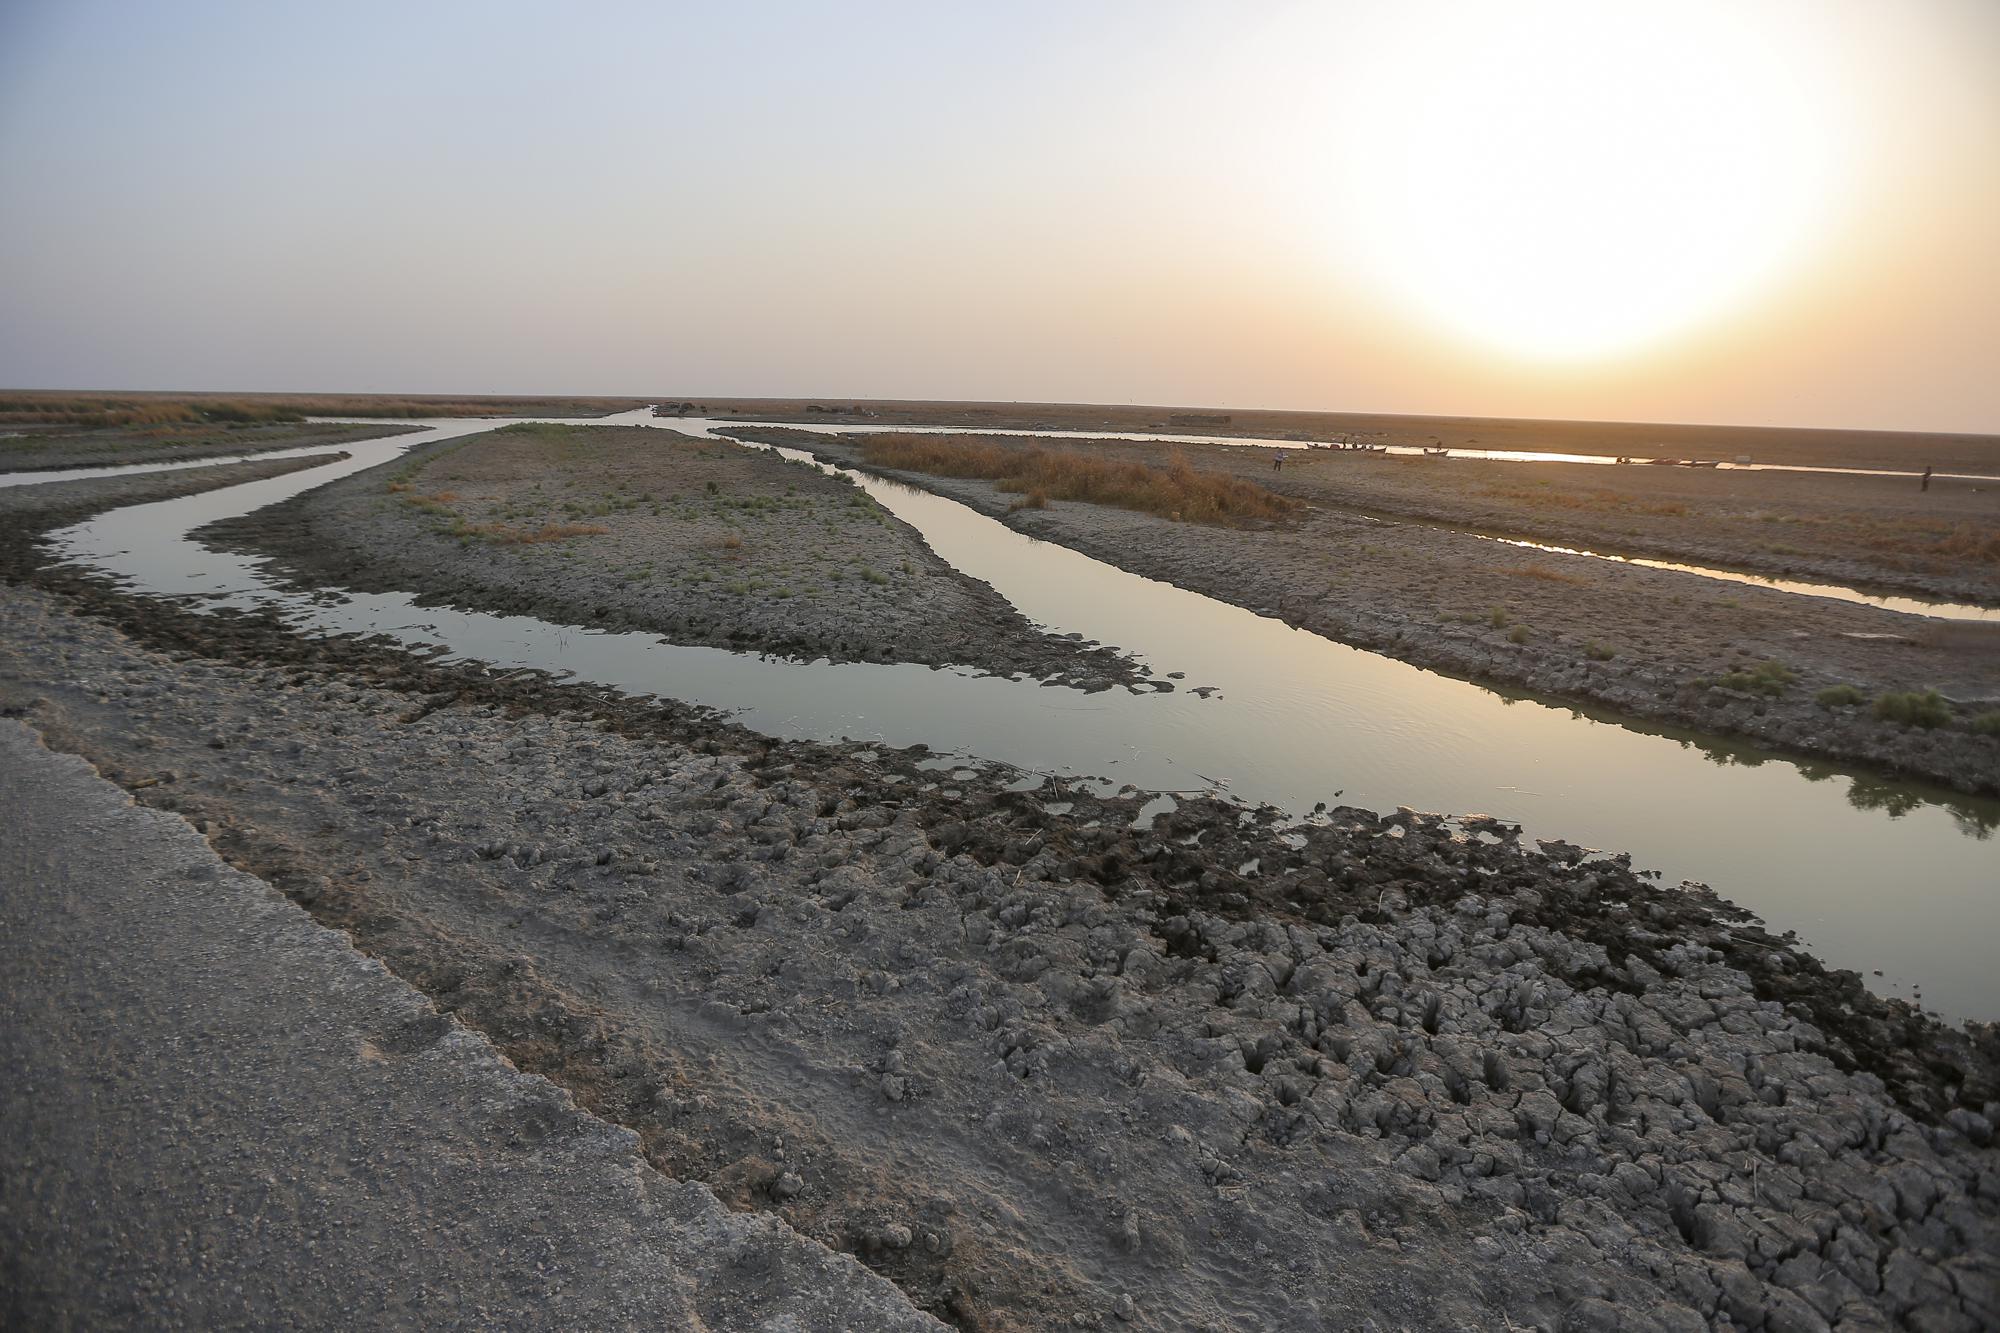 Water levels in the Chibayish marshes of southern Iraq are declining and fishermen say certain waterways are no longer accessible by boat, in Dhi Qar province, Iraq, Friday 2 September 2022. The Tigris-Euphrates River flows have fallen by 40 percent the past four decades as the states along its length - Turkey, Syria, Iran and Iraq pursue rapid, unilateral development of the waters' use. Photo: Anmal Khalil / AP Photo